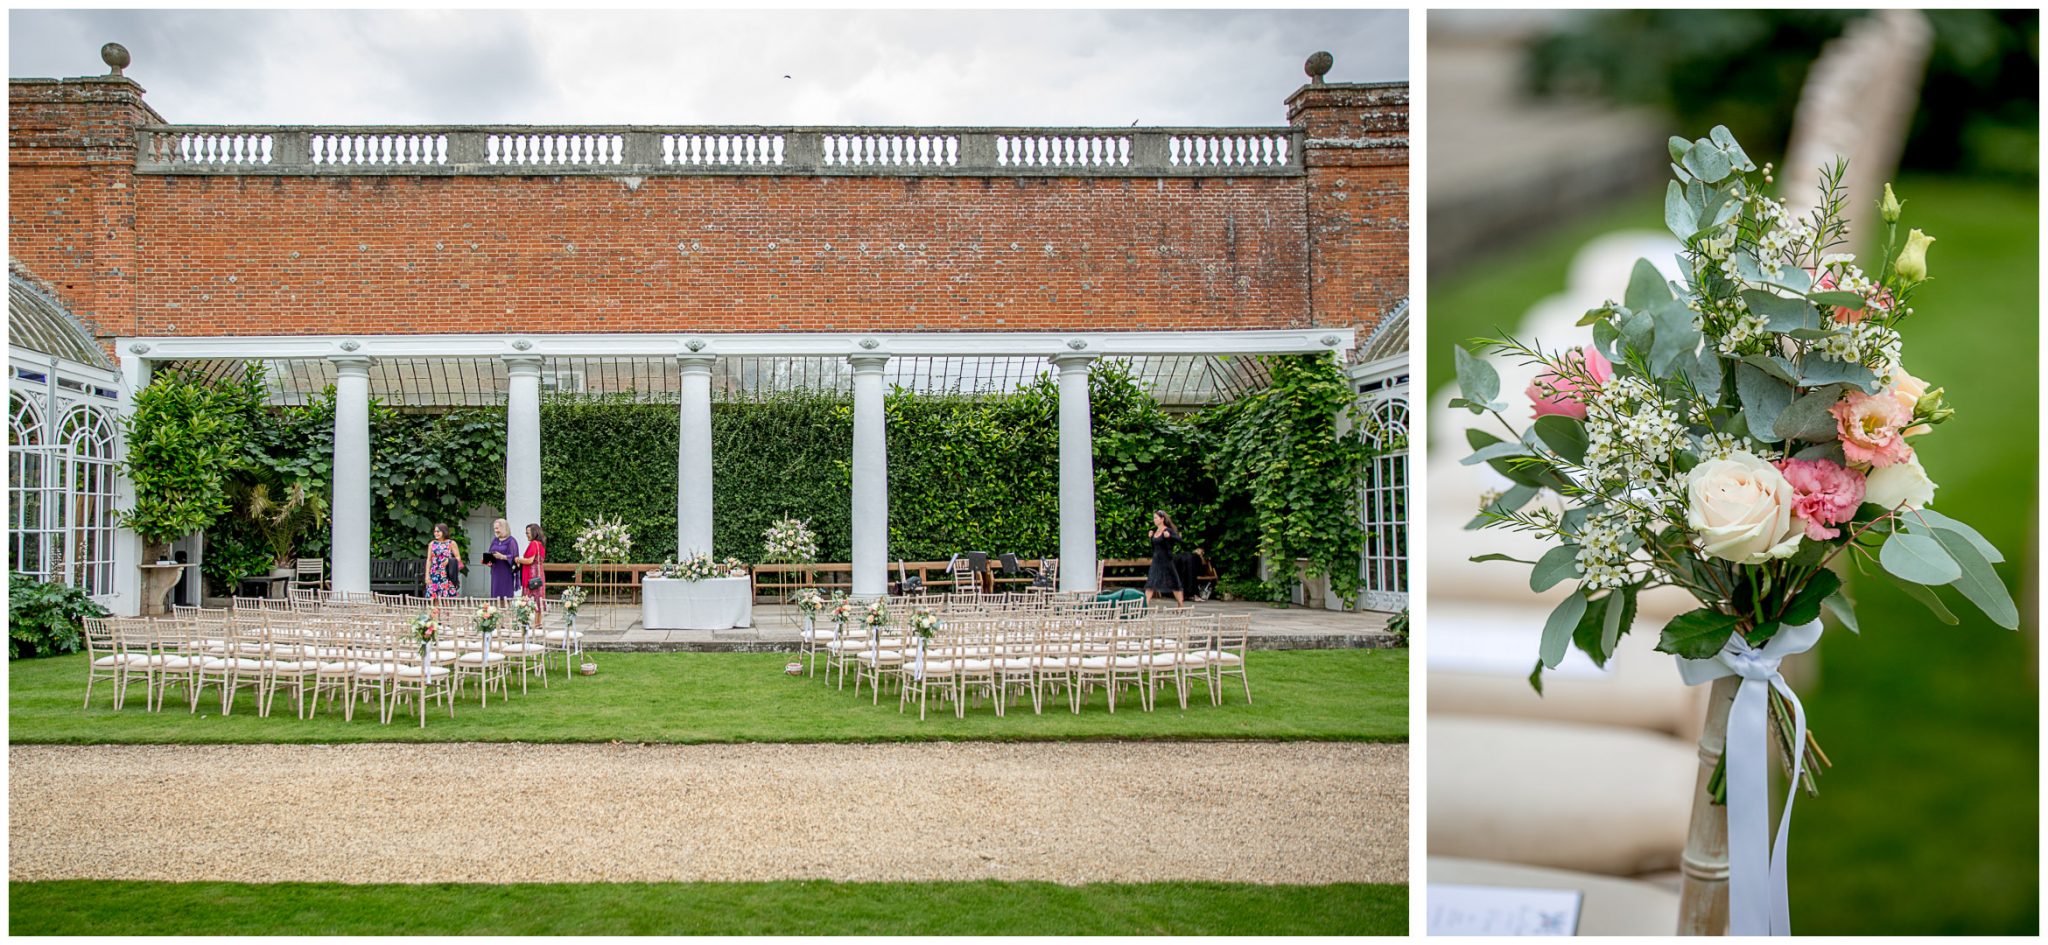 Outdoor ceremony setup between the orangeries at the rear of the venue